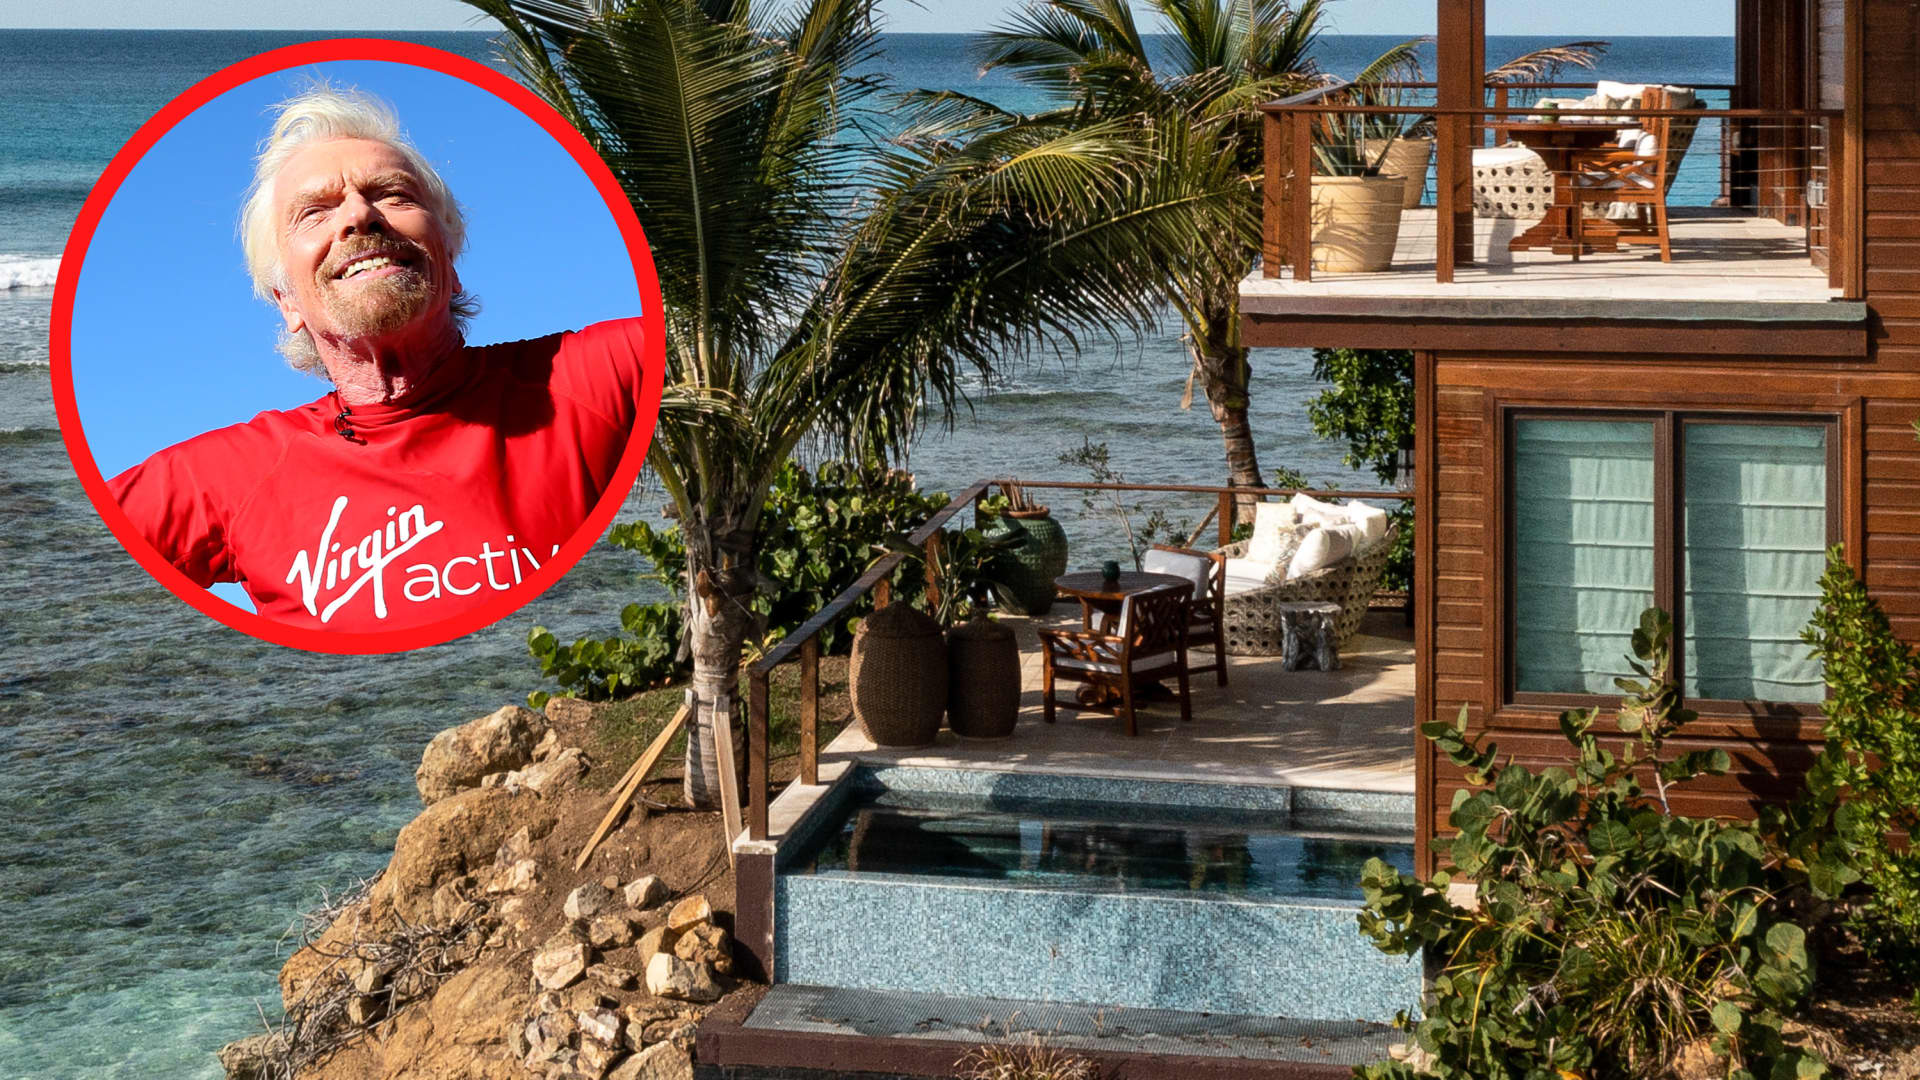 You can stay on Richard Branson's private island this holiday season—rates start at $5,400 a night